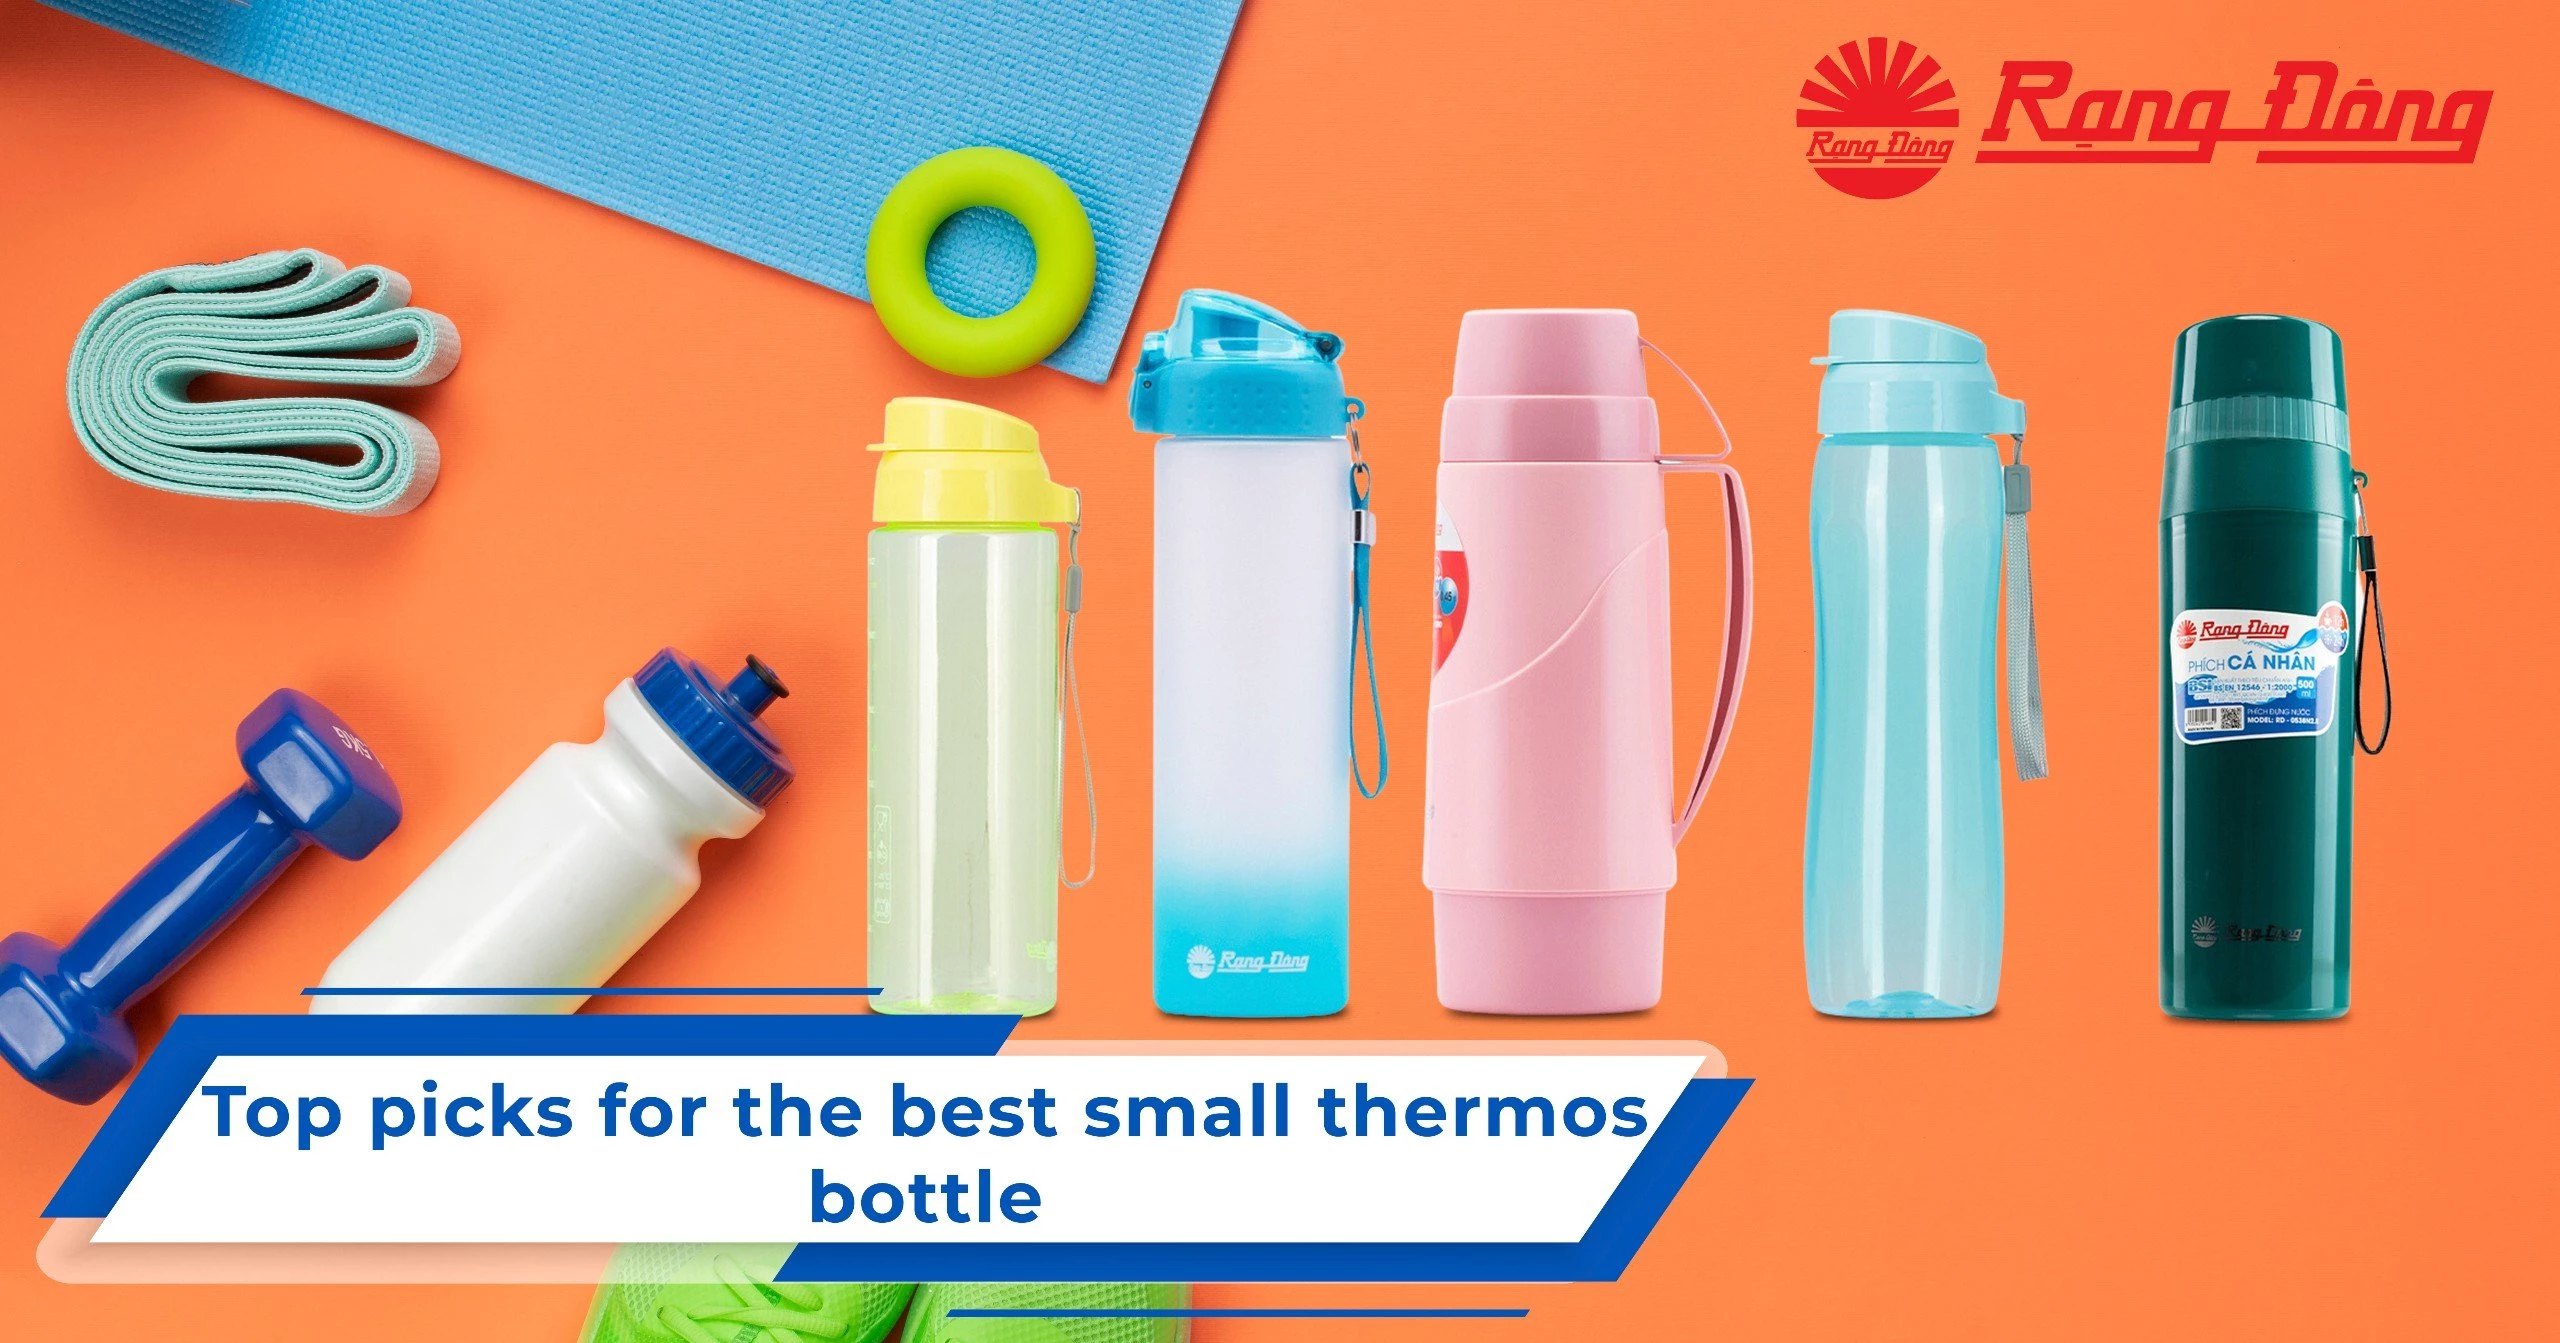 Top picks for the best small thermos bottle